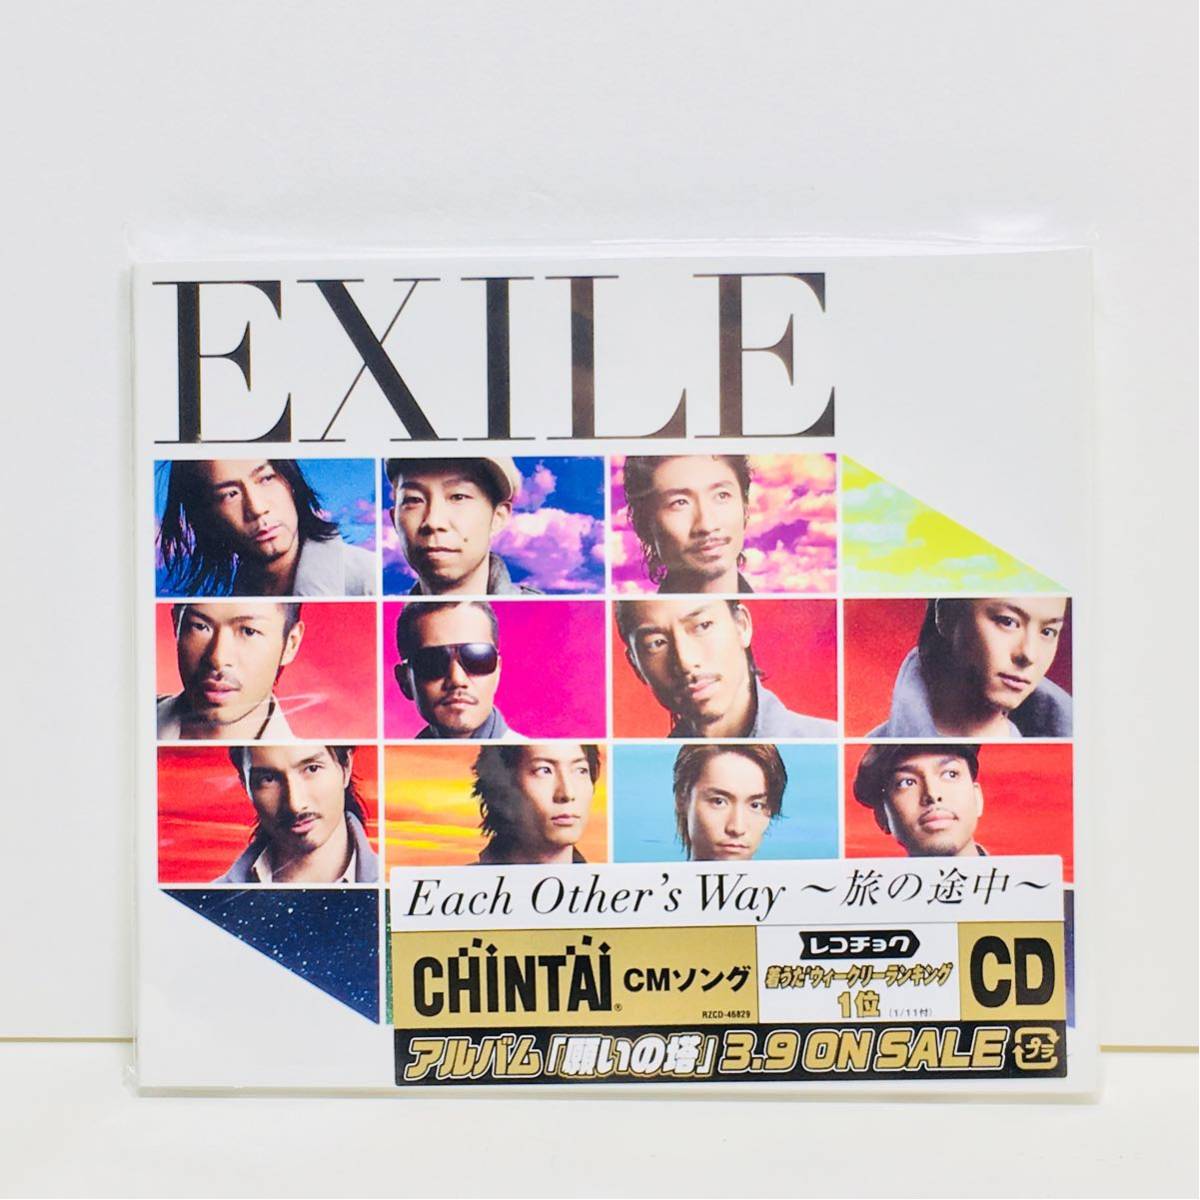 g1/在庫整理品!未開封!新品! /EXILE /Each Other’s Way ~旅の途中~ /ゆうメール送料180円_画像1